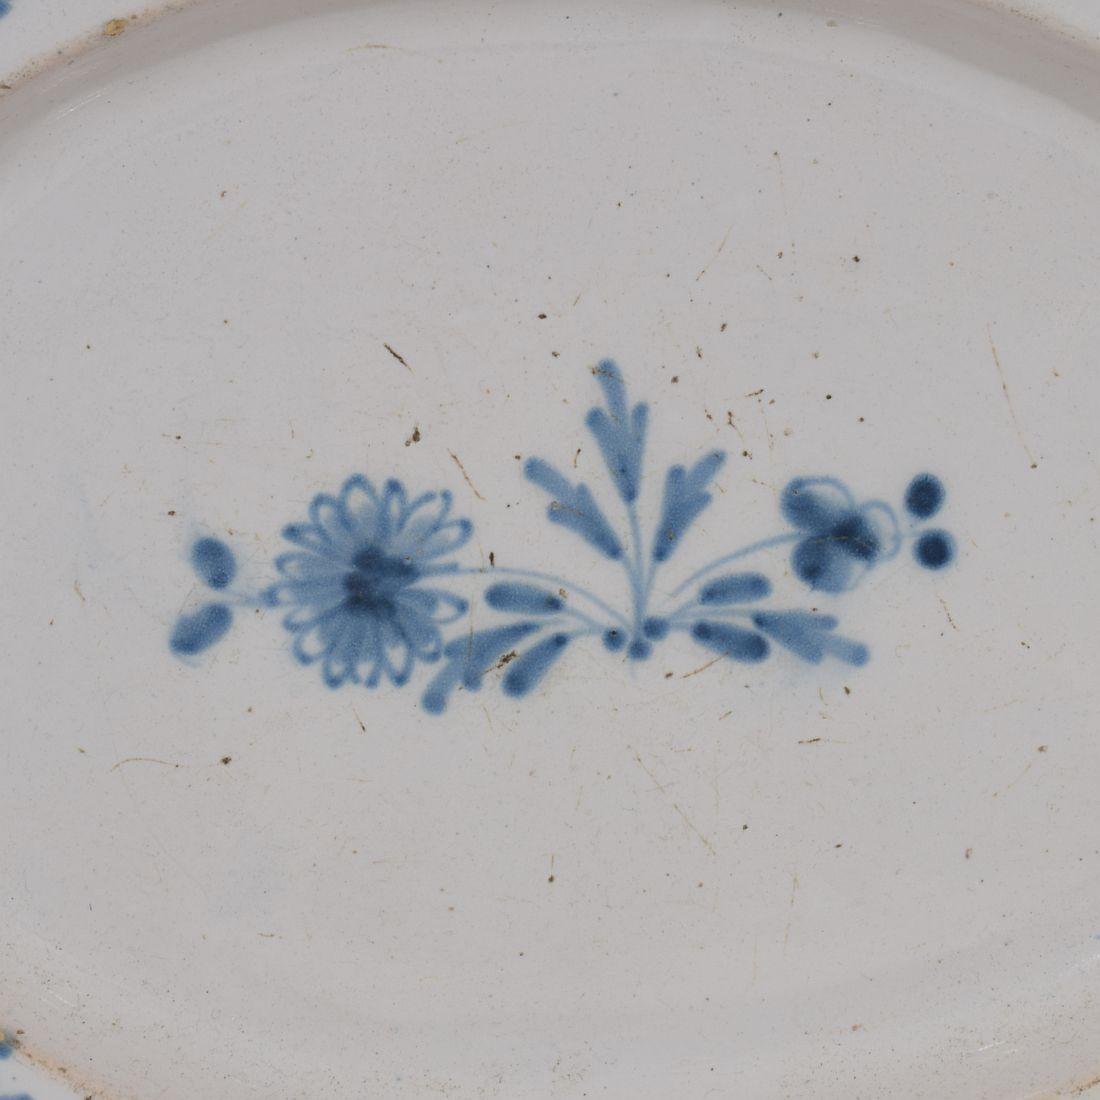 French, 18th Century Glazed Earthenware Rouen Platter For Sale 2